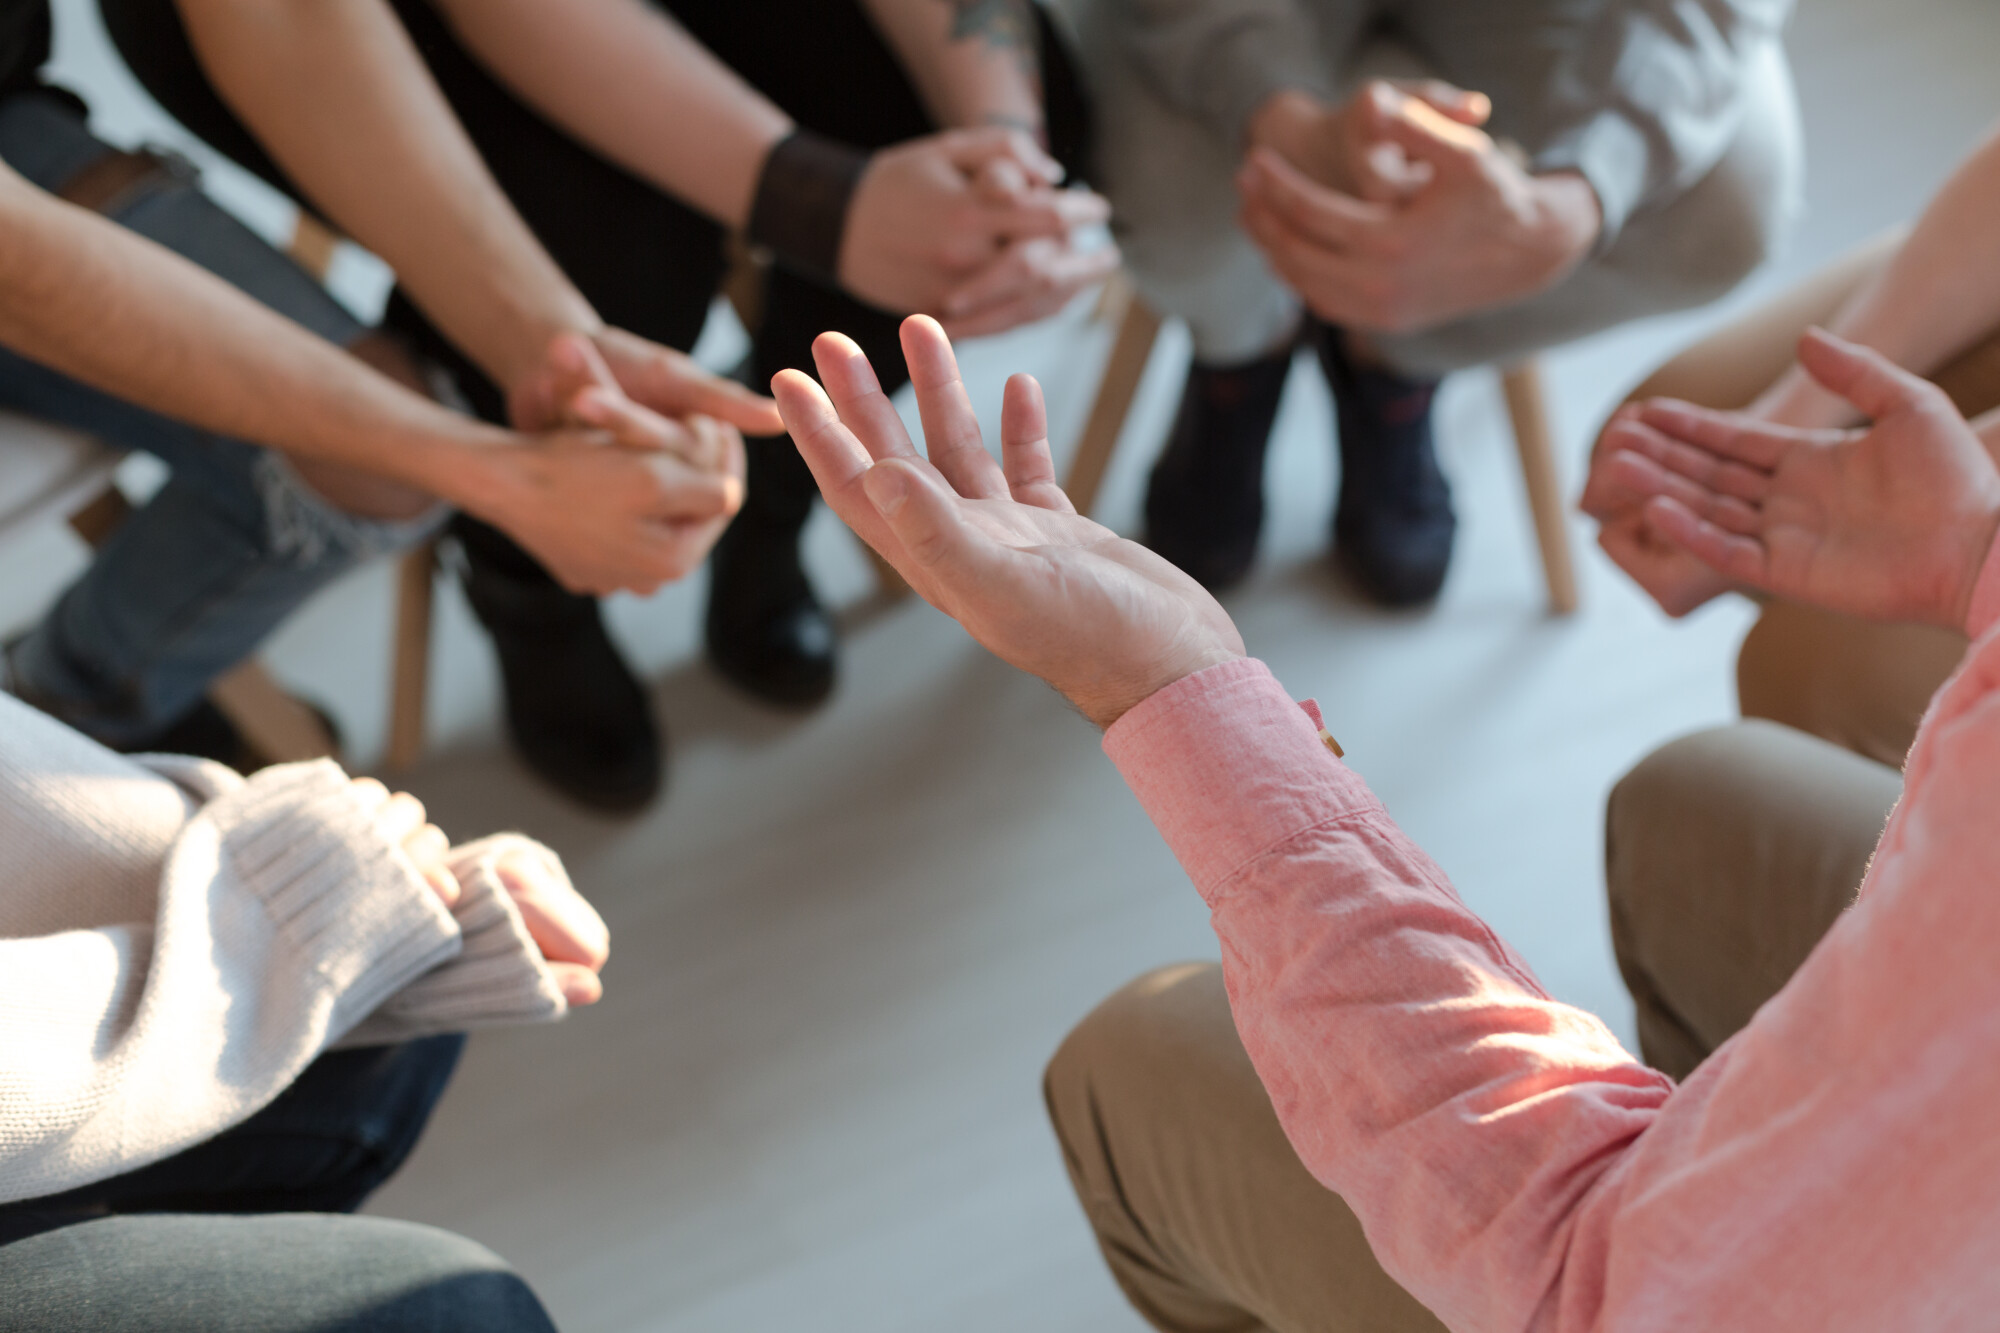 Do grief support groups work? You can check one out or learn about the experience by reading this brief guide on the topic.